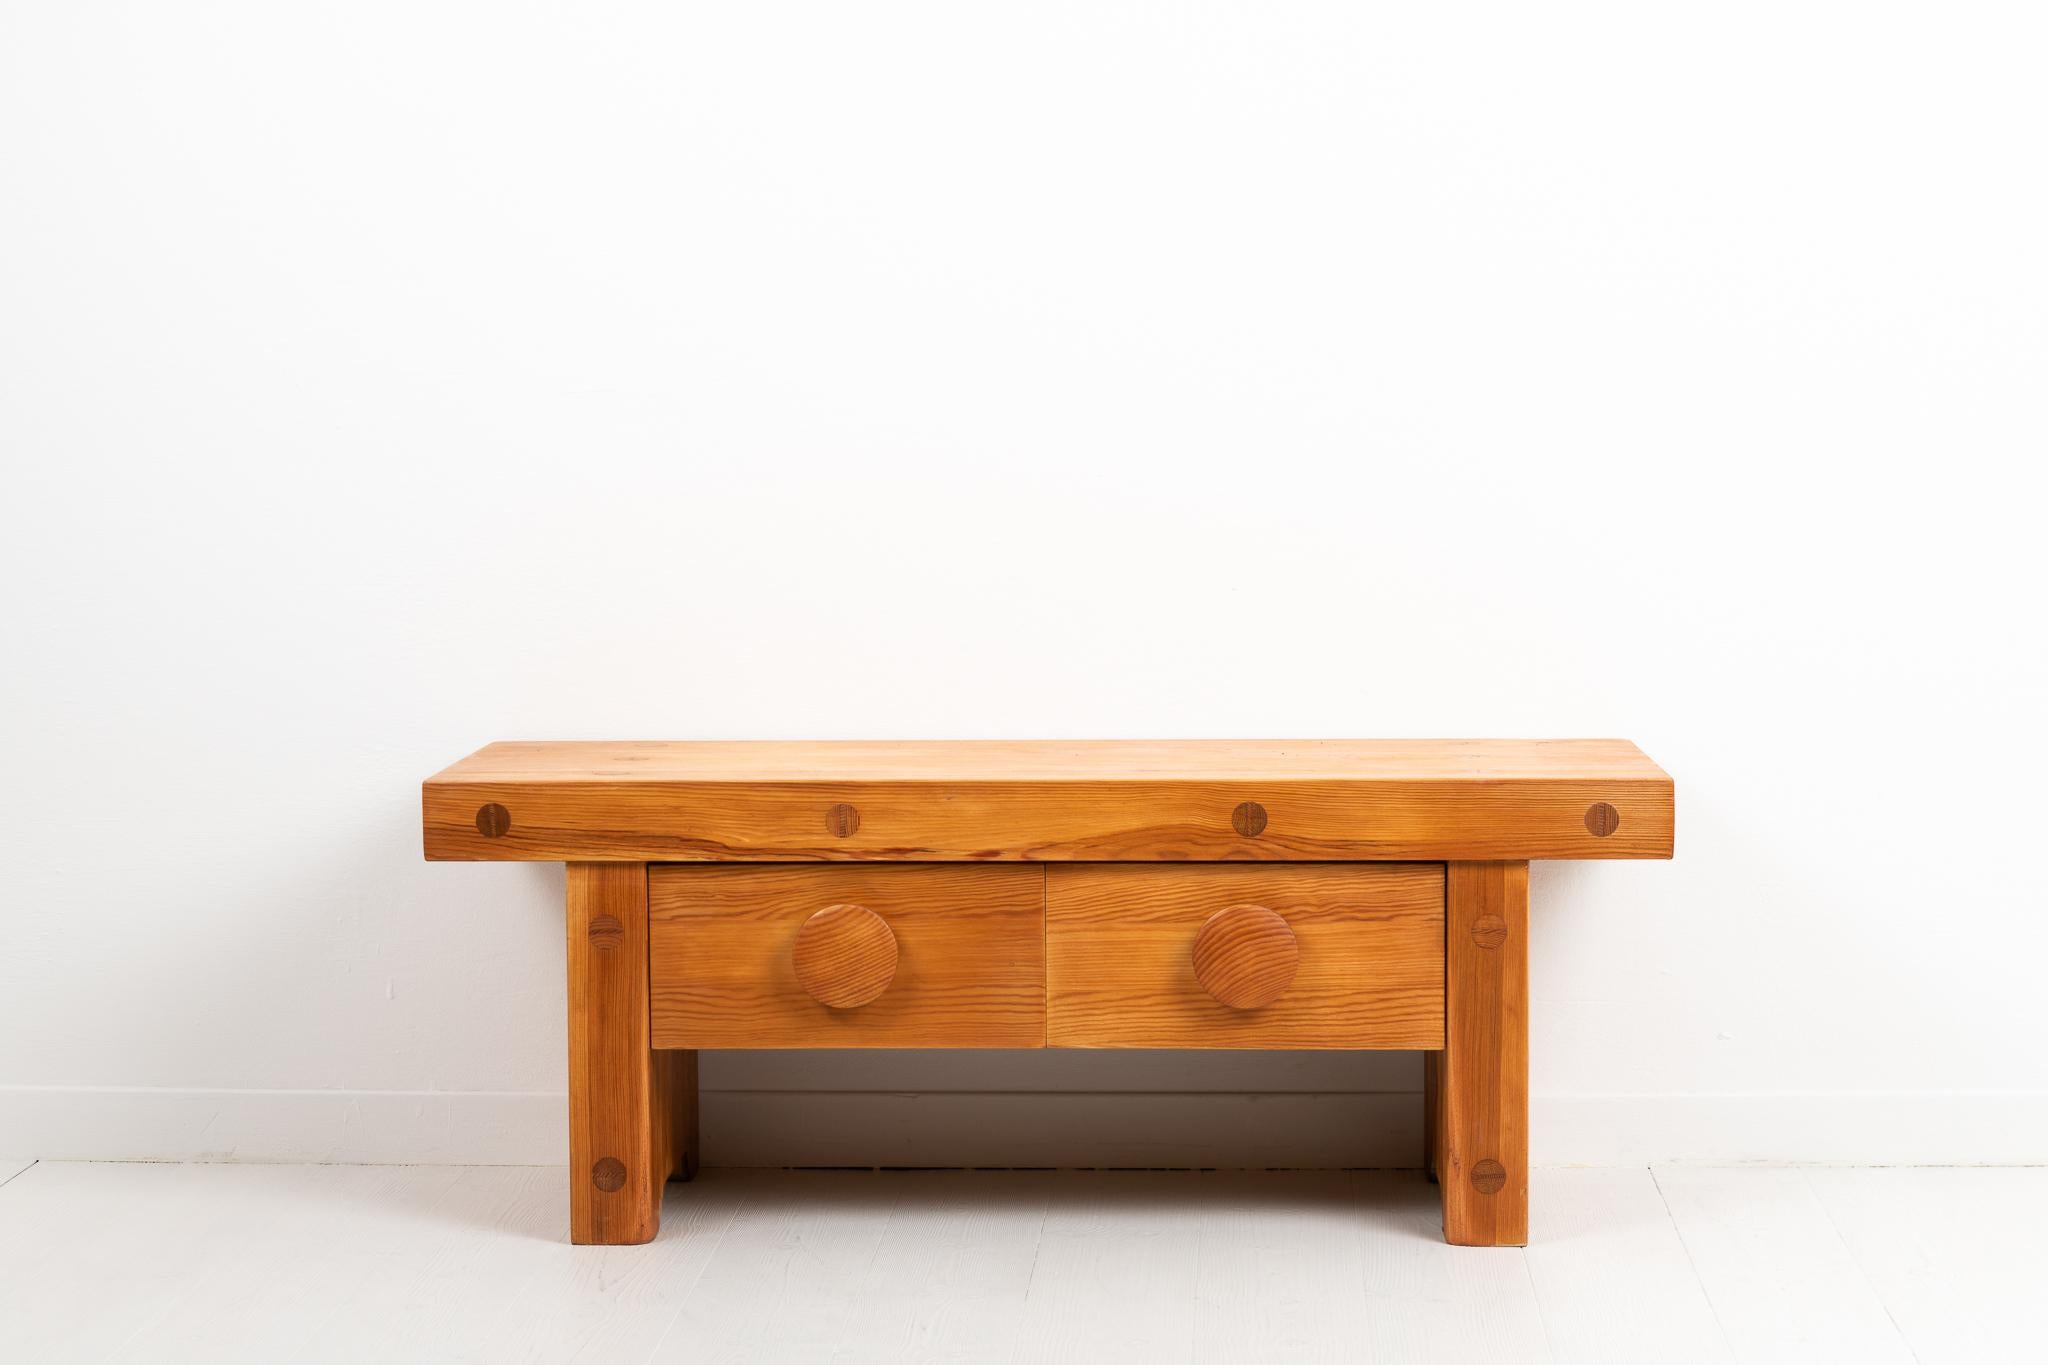 Small pine bench or side table from Sweden. Designed by Roland Wilhelmsson and made by Karl Andersson & Söner, Huskvarna during the 1970s. The bench has a simple design and sturdy construction and the colourful wood means the bench doesn't need any